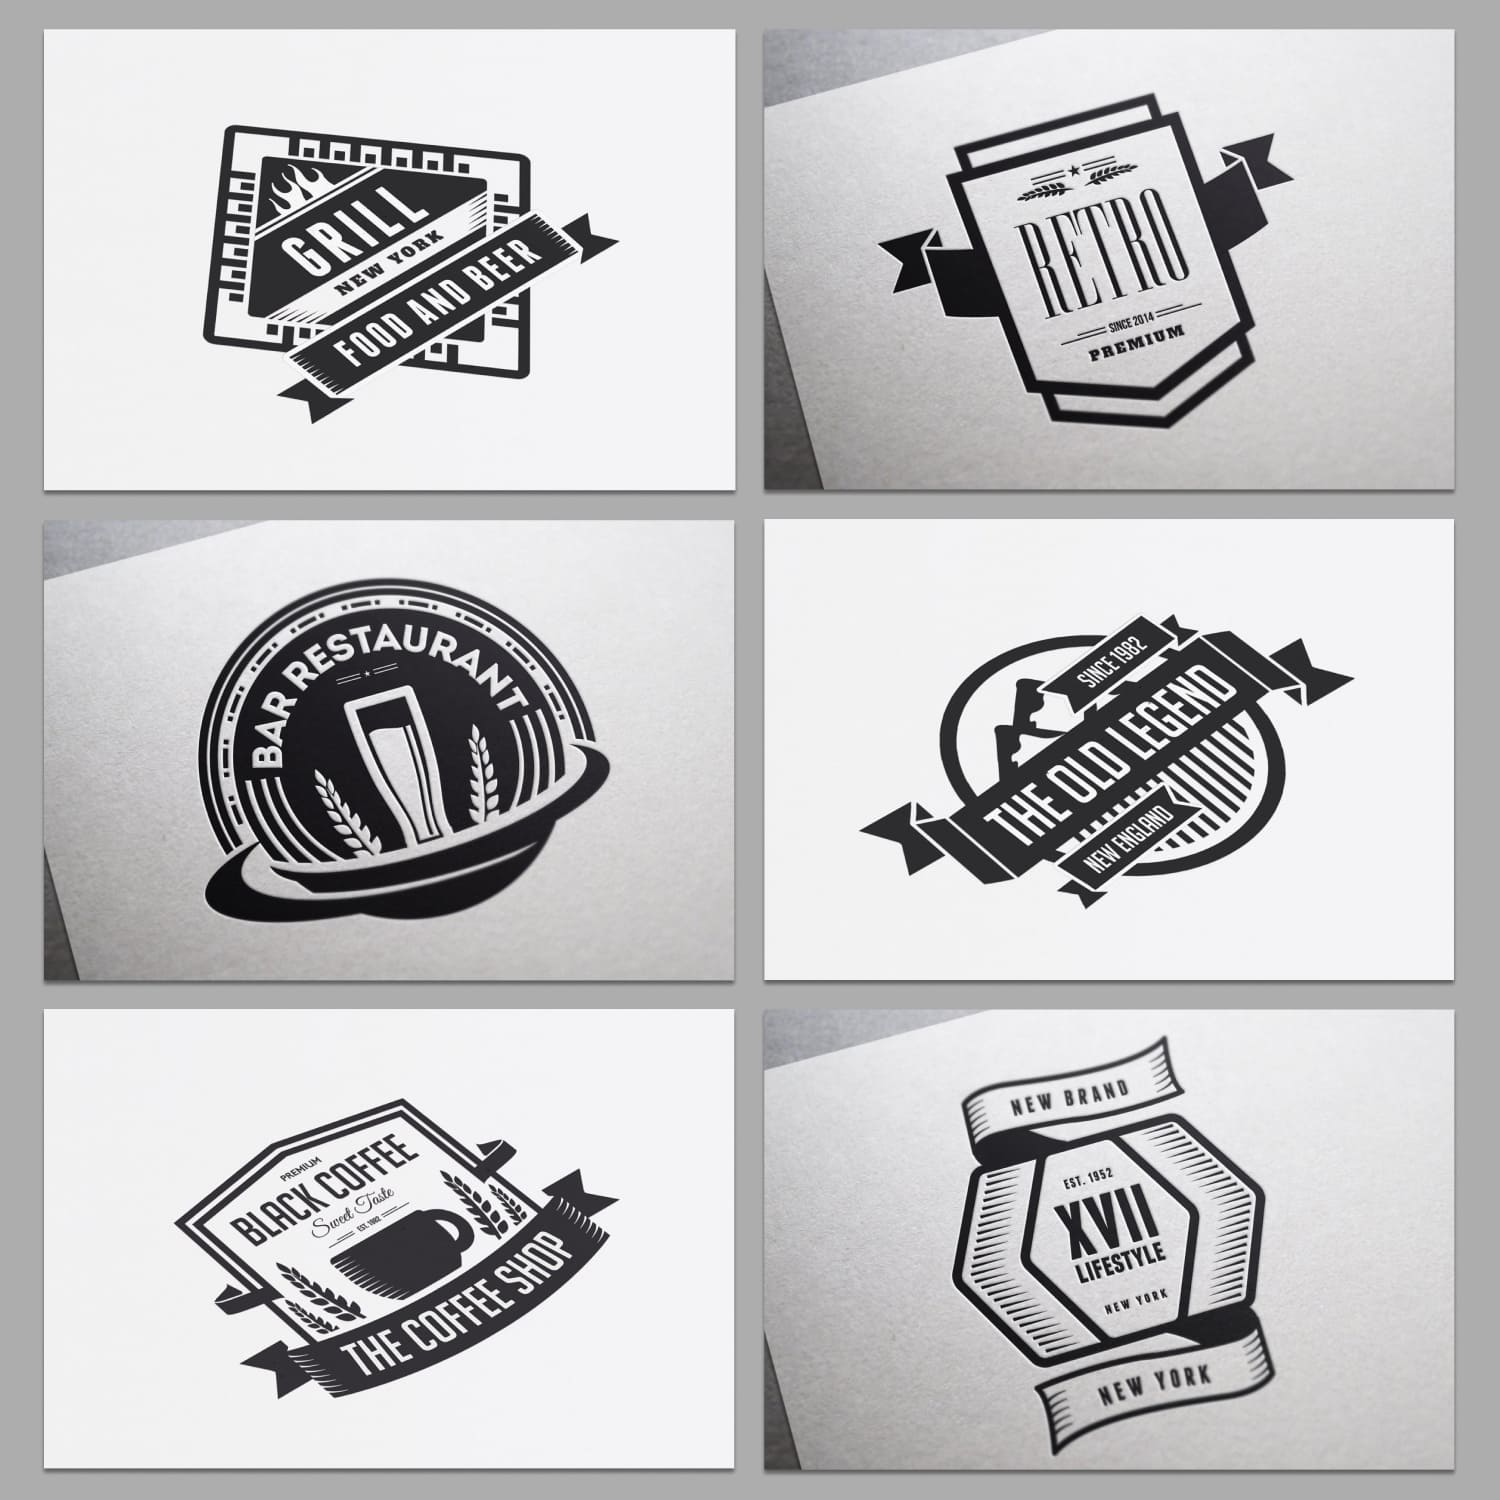 Add this awesome retro vintage style to your designs.